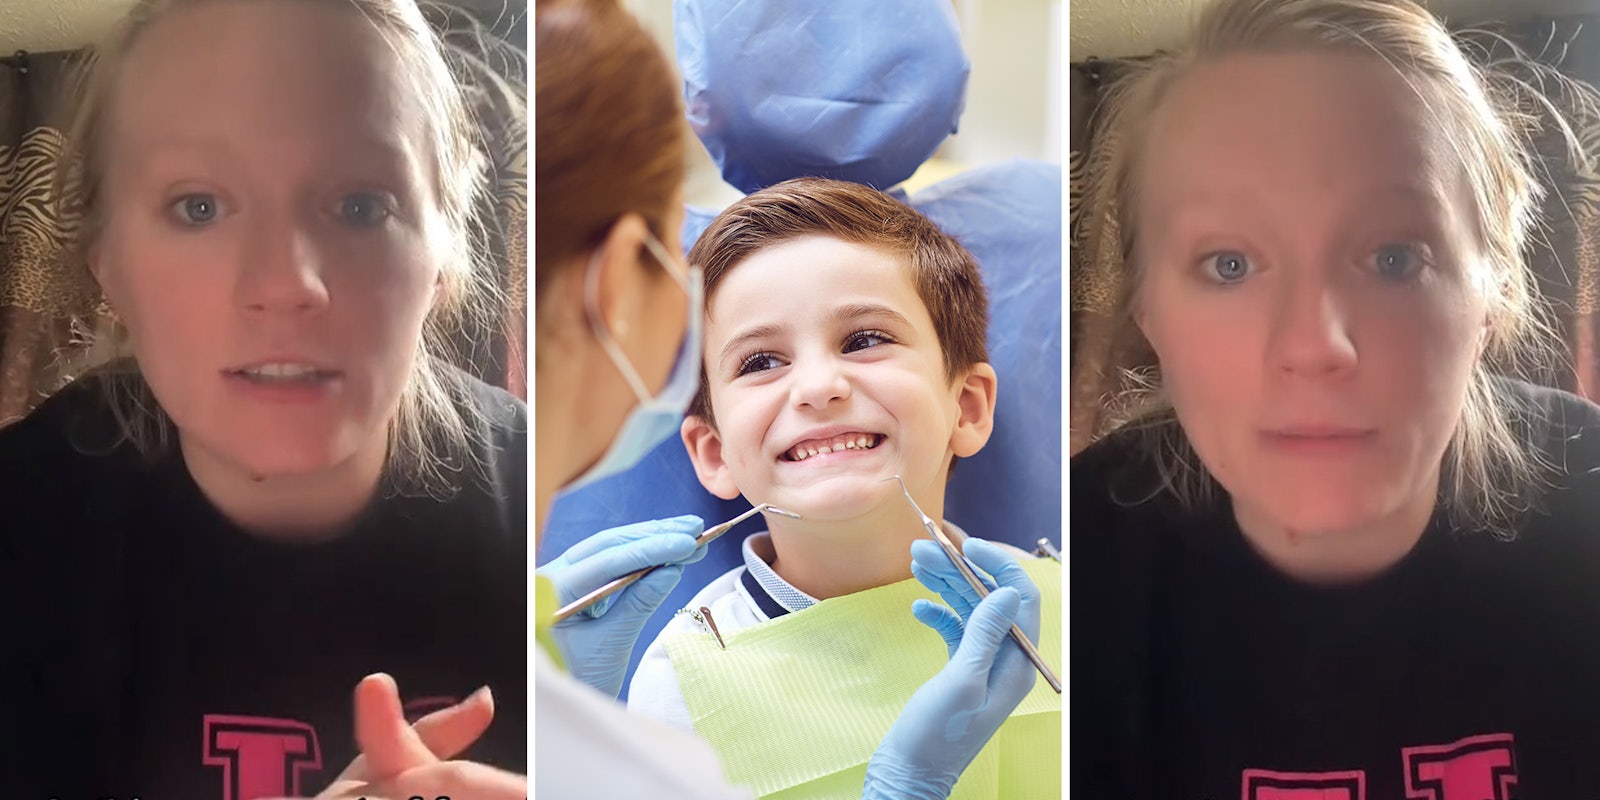 Mom says school scheduled dental surgery for her kids without consent. There’s nothing wrong with them